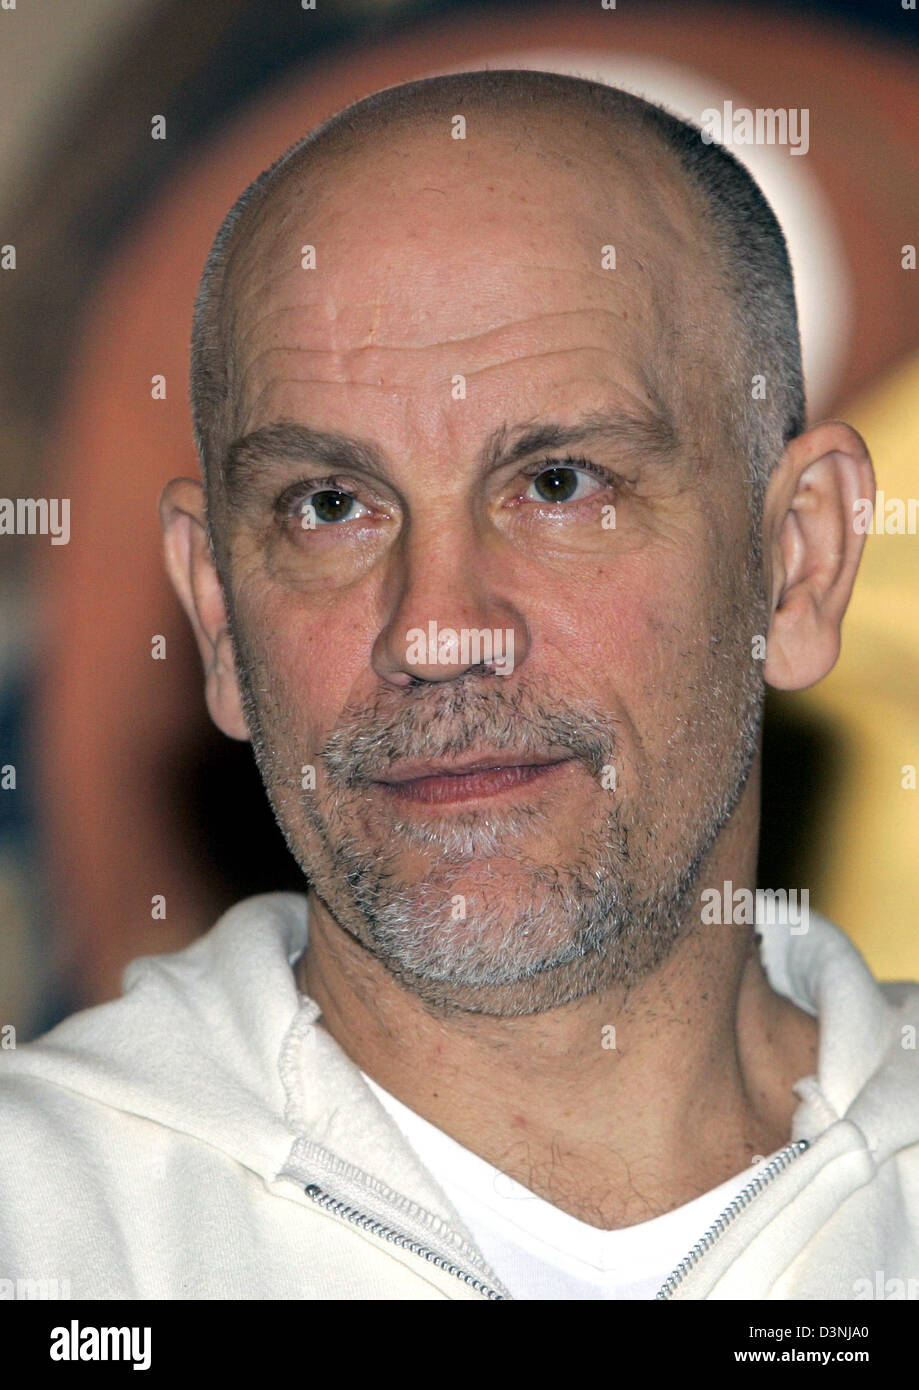 US-American actor John Malkovich poses during a photo call for his film 'KLIMT' in Cologne, Germany, Saturday 20 May 2006. The movie premieres tonight in Germany. Photo: Alexander Ruesche Stock Photo